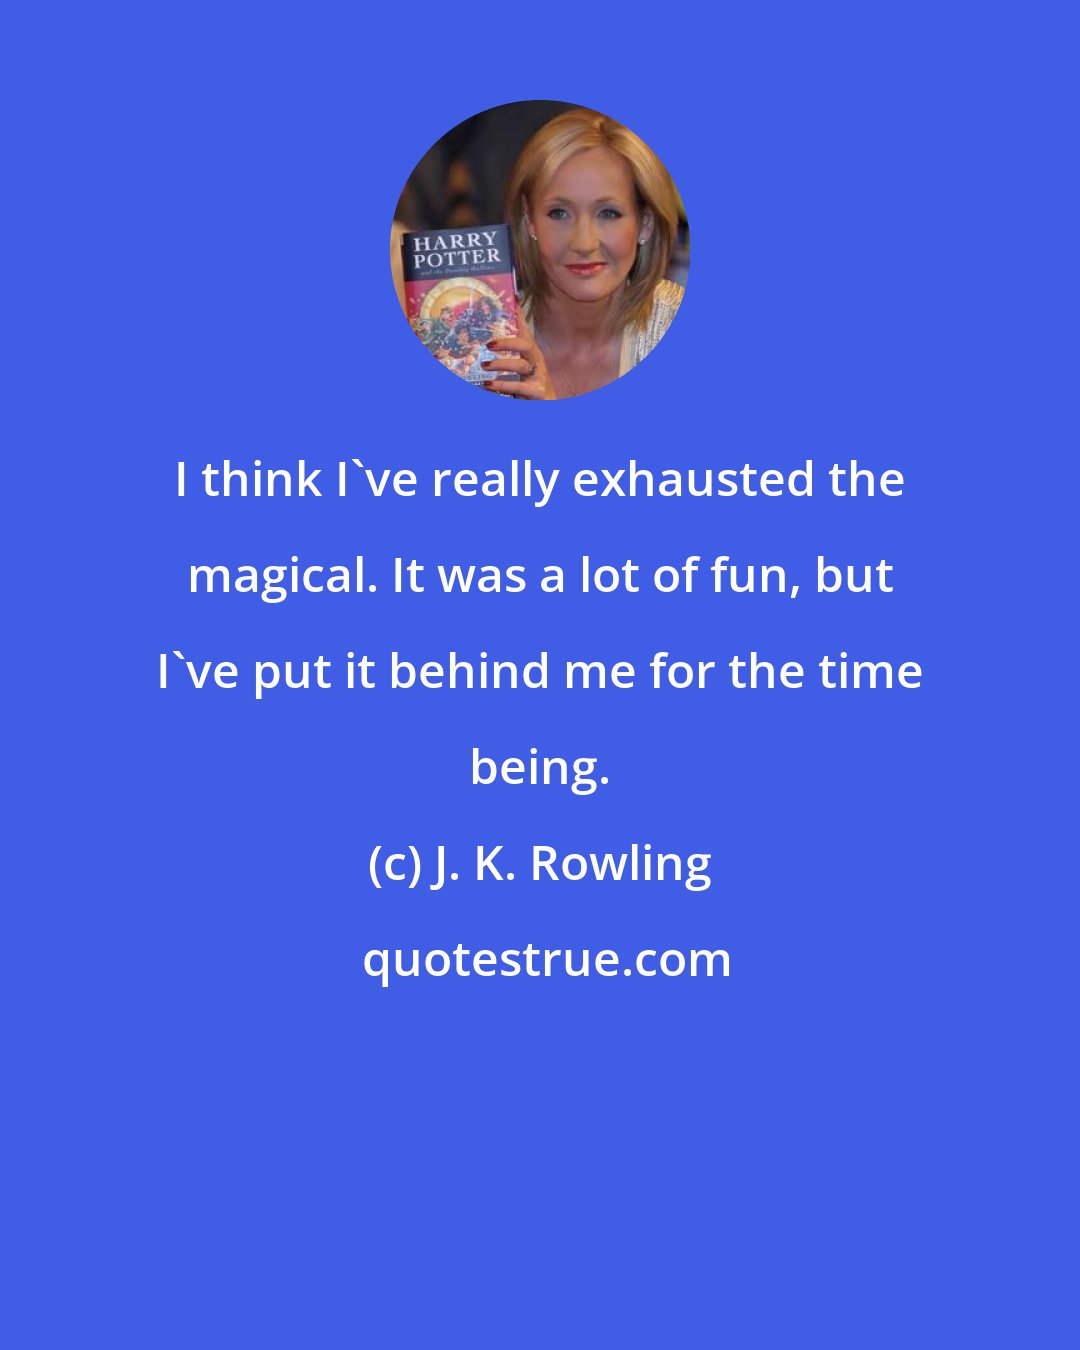 J. K. Rowling: I think I've really exhausted the magical. It was a lot of fun, but I've put it behind me for the time being.